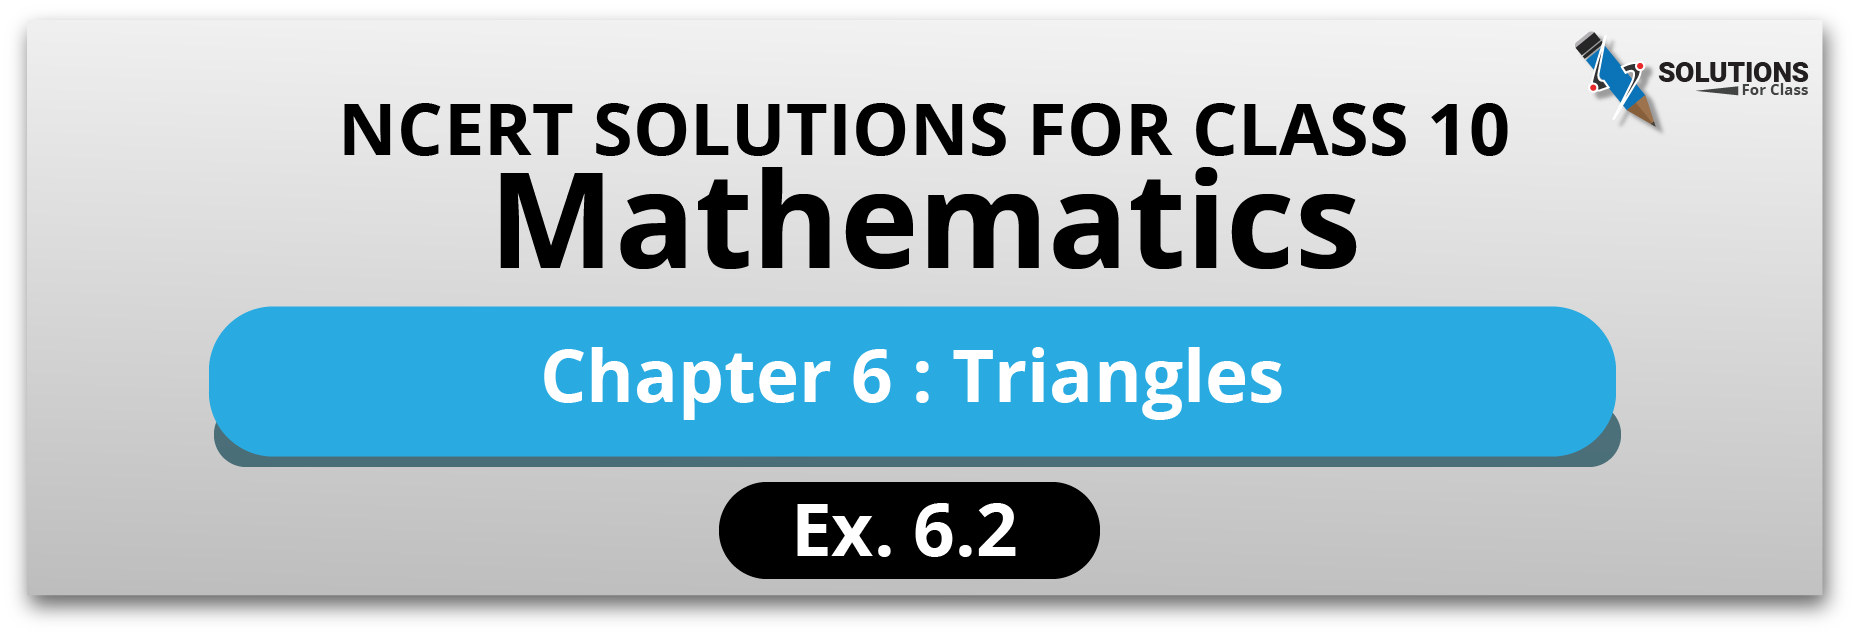 NCERT Solution For Class 10, Maths, Chapter 6 Triangles, Exercise 6.2